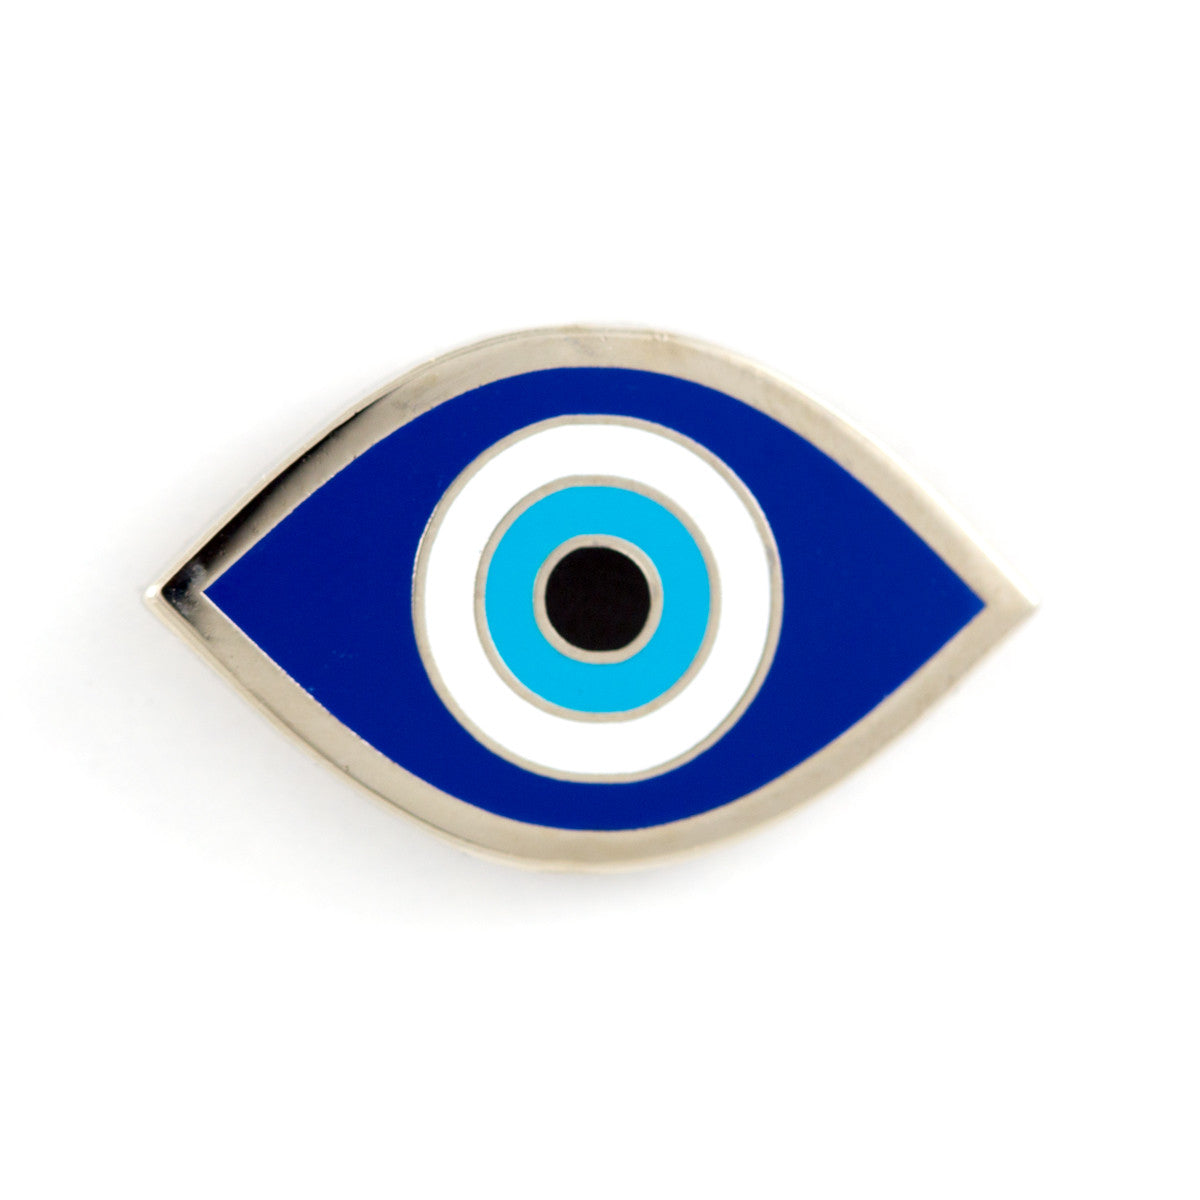 Evil Eye Pin – These Are Things